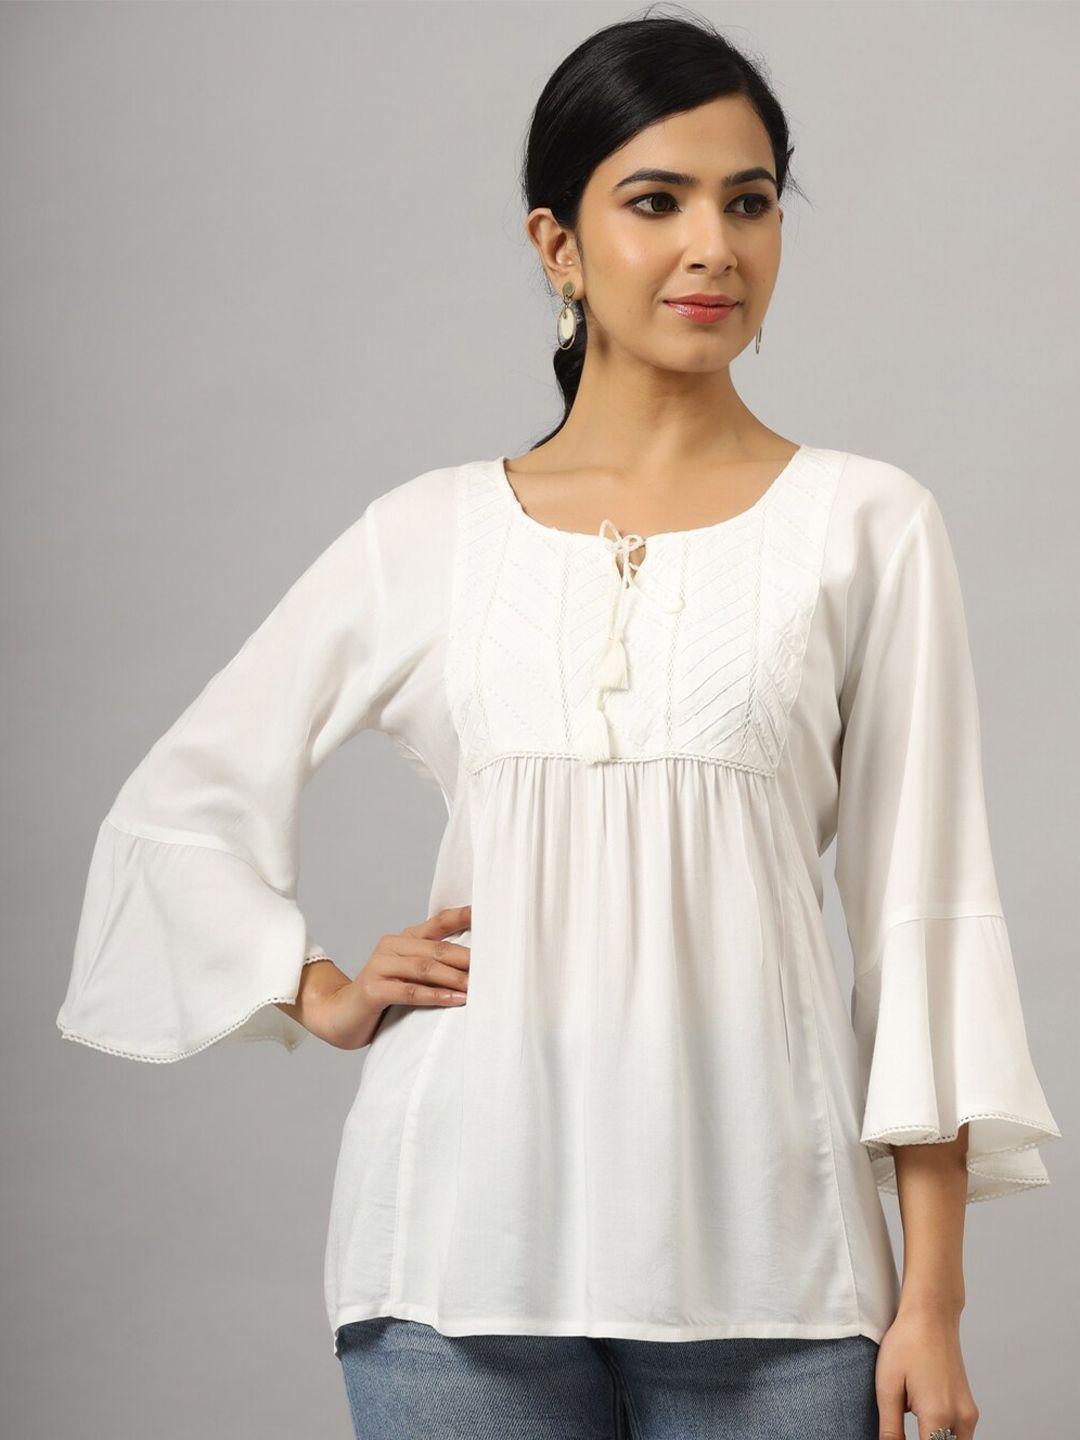 amchoor tie-up neck three-fourth bell sleeve empire top